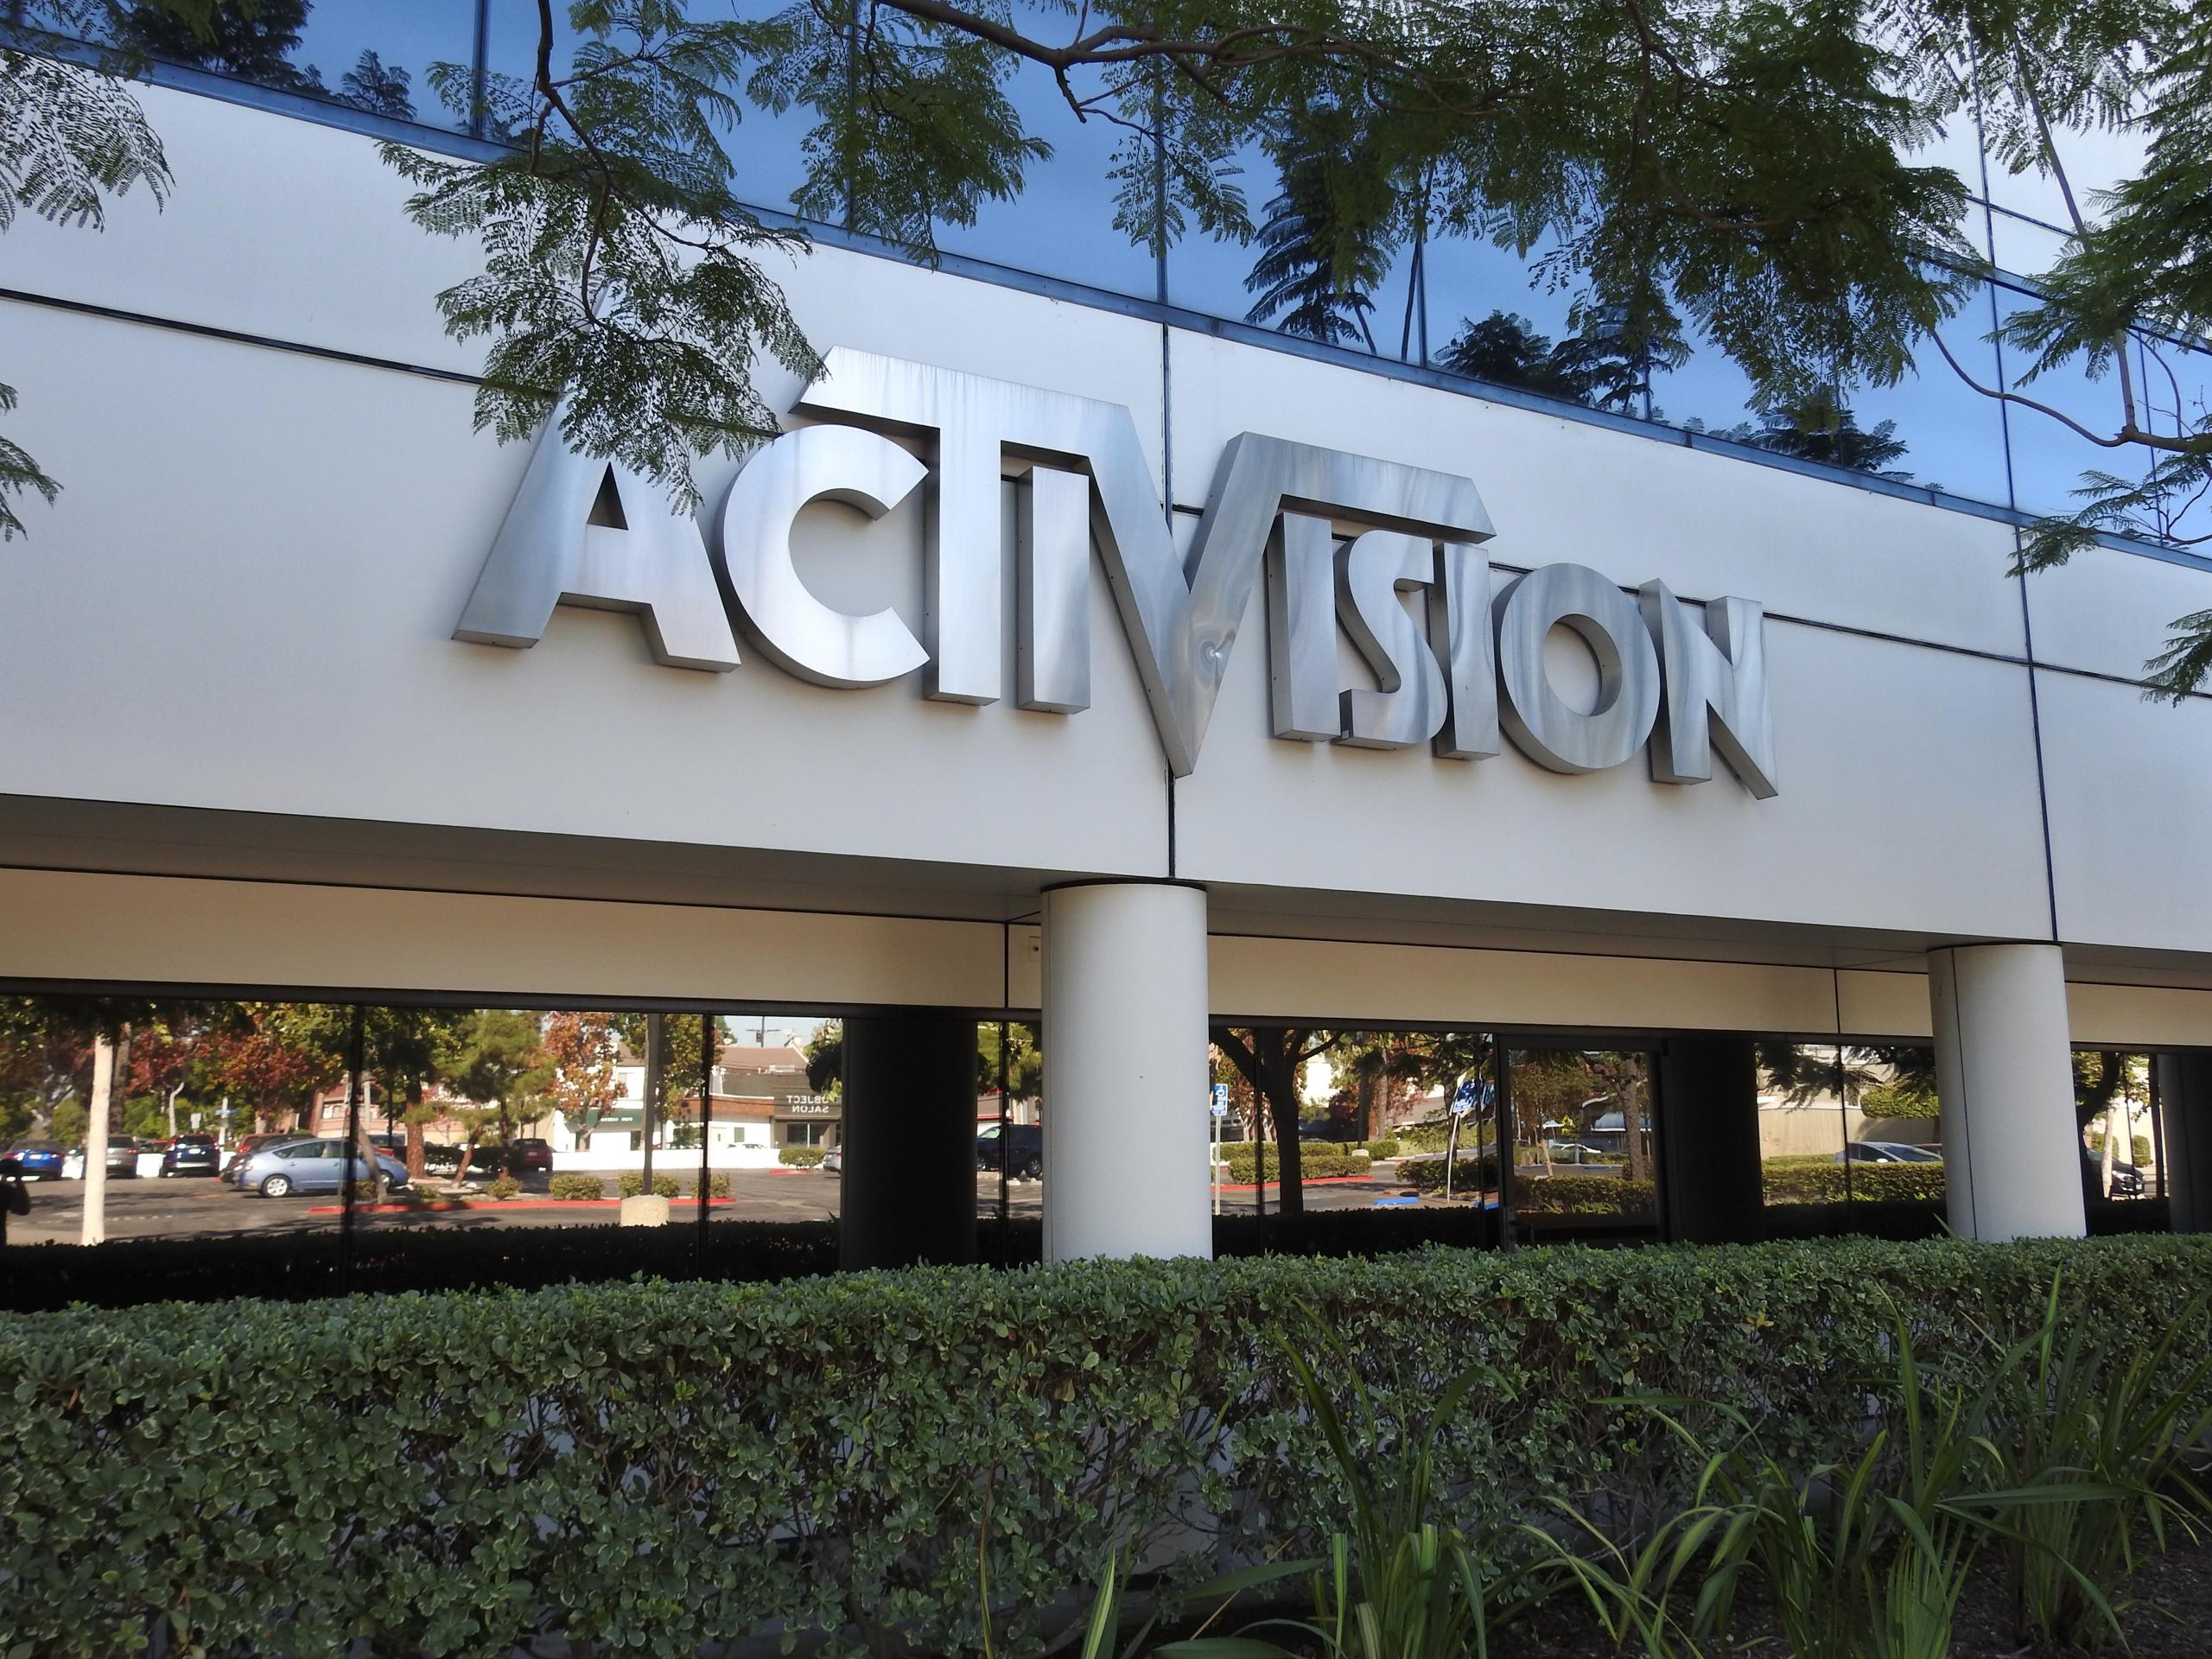 Microsoft acquisition of Activision Blizzard threatened by FTC as  shareholders approve deal